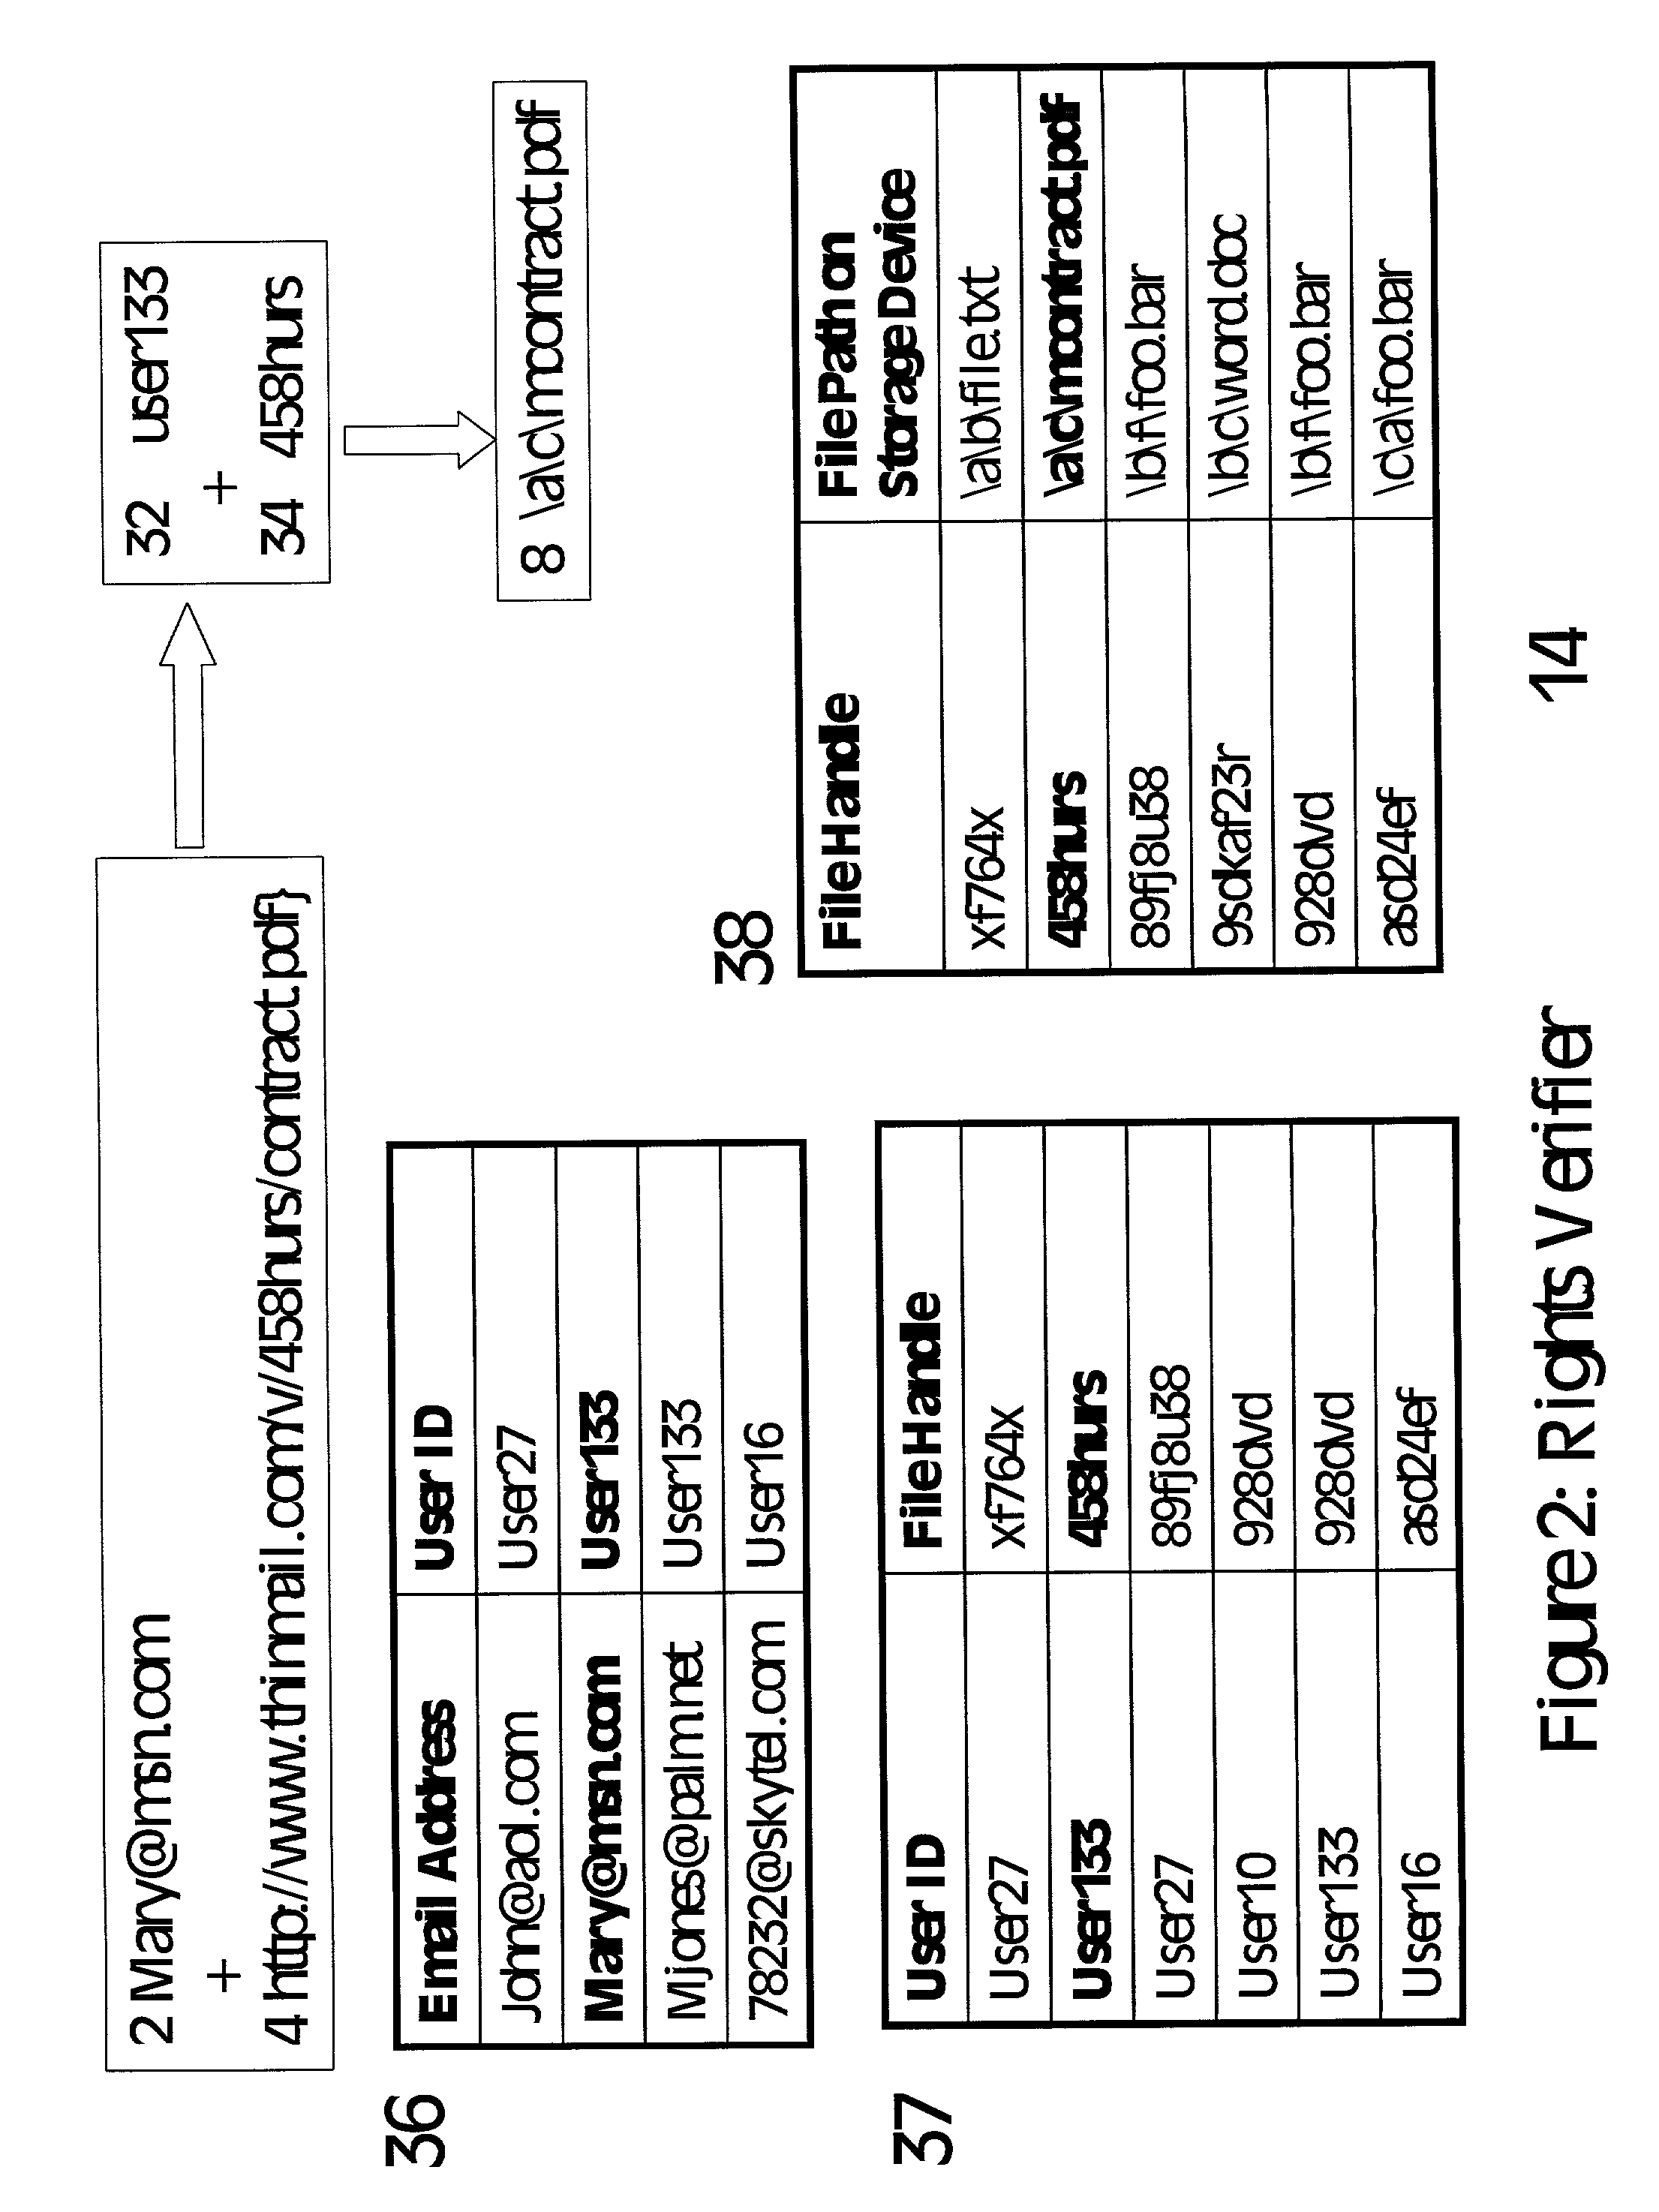 System and method for the electronic mail based management and manipulation of stored files